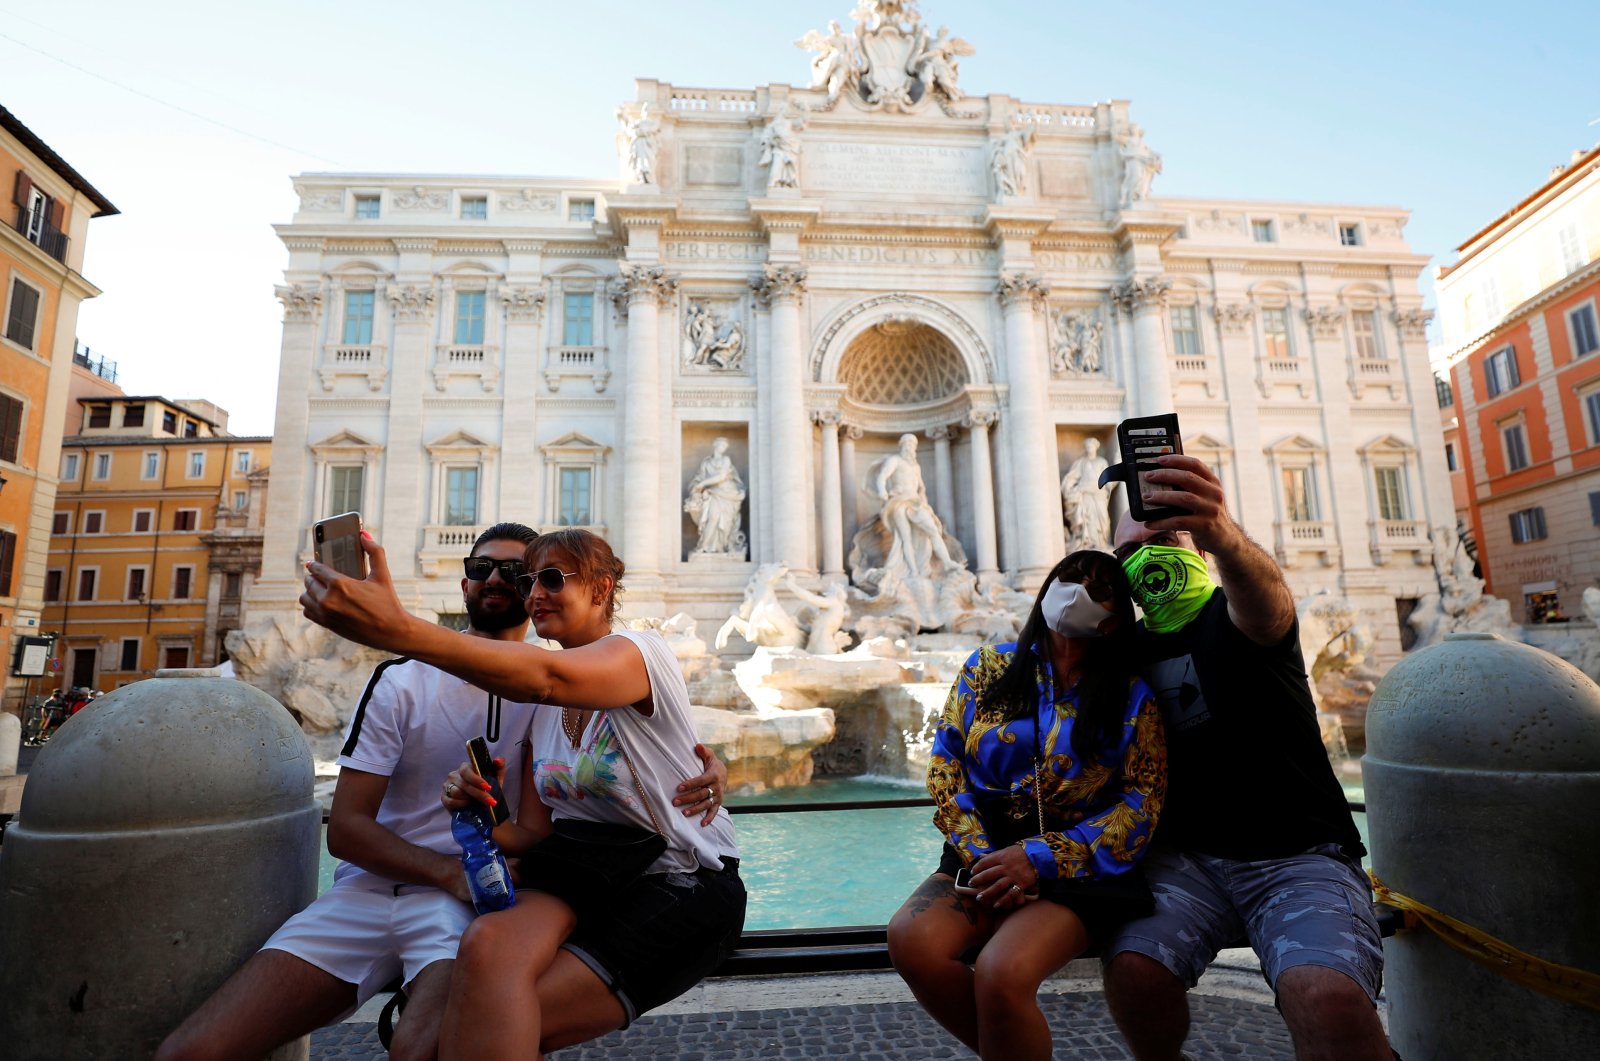 A couple wears face masks while other couple does not as they both take selfies in front of Rome's Trevi Fountain following a government decree that states face coverings must be worn between 6 p.m. and 6 a.m. in areas where gatherings are common, Aug. 19, 2020. (REUTERS Photo)